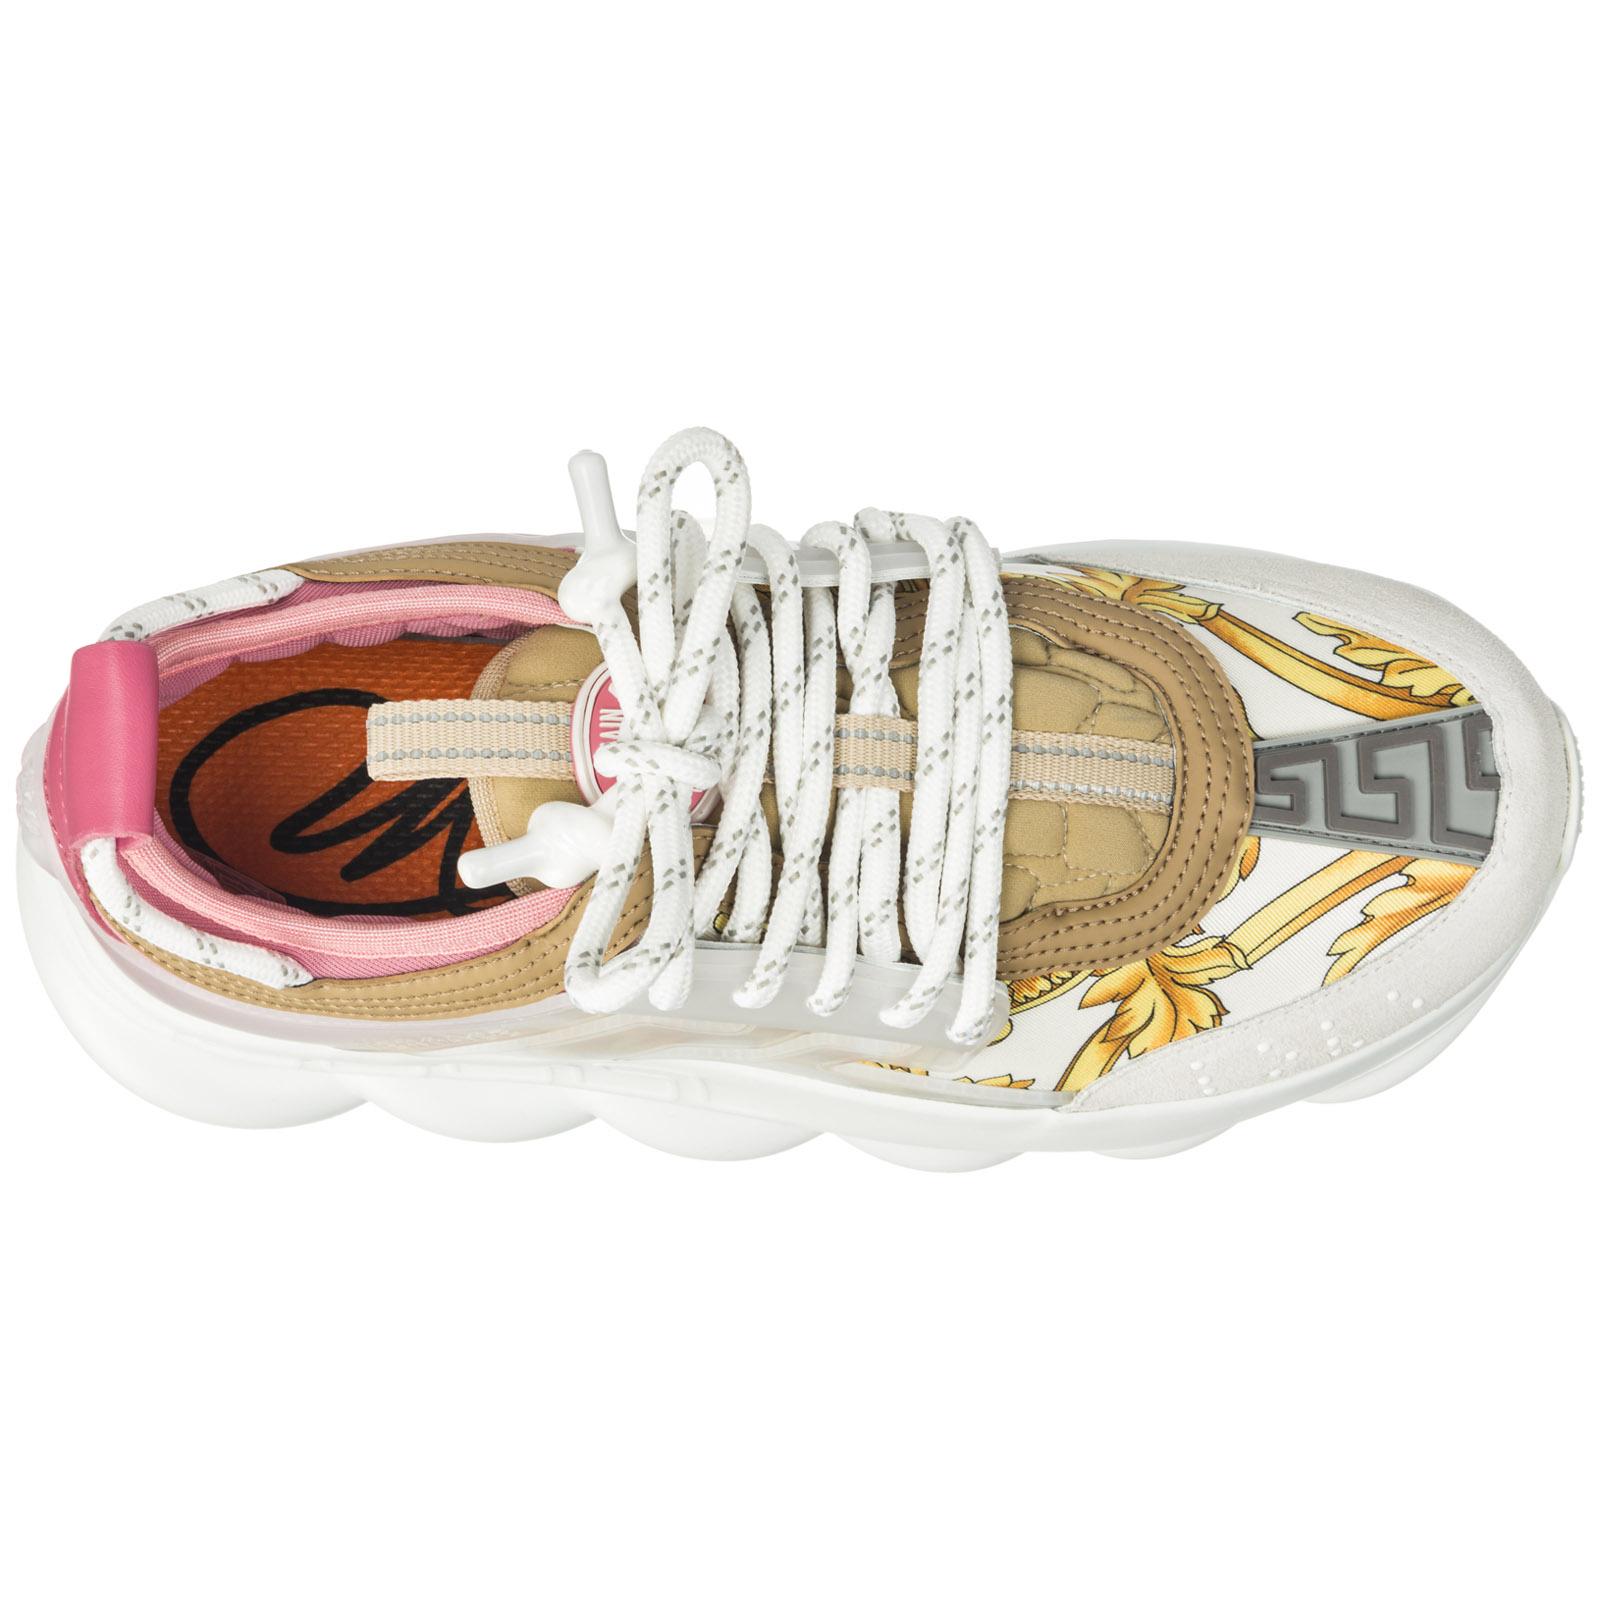 Versace Women's Shoes Trainers Sneakers Chain Reaction in Pink | Lyst